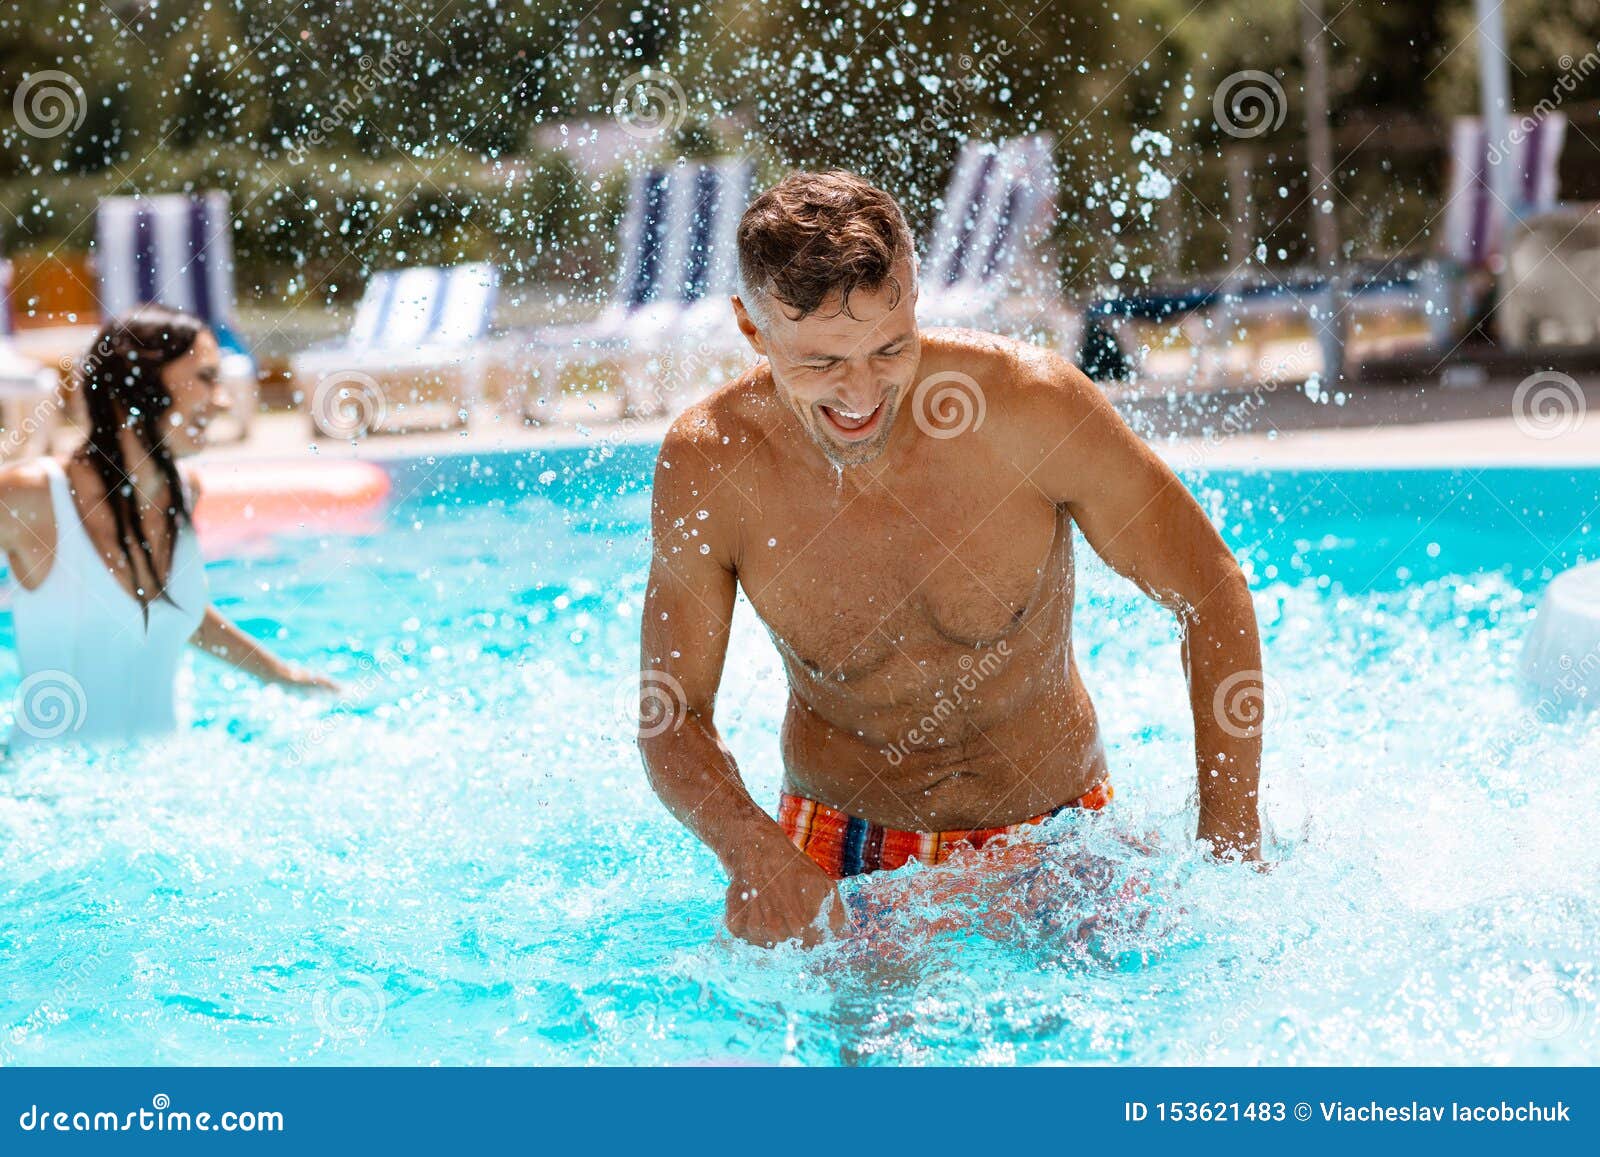 Athletic Handsome Man Laughing After Swimming With Wife Stock Image